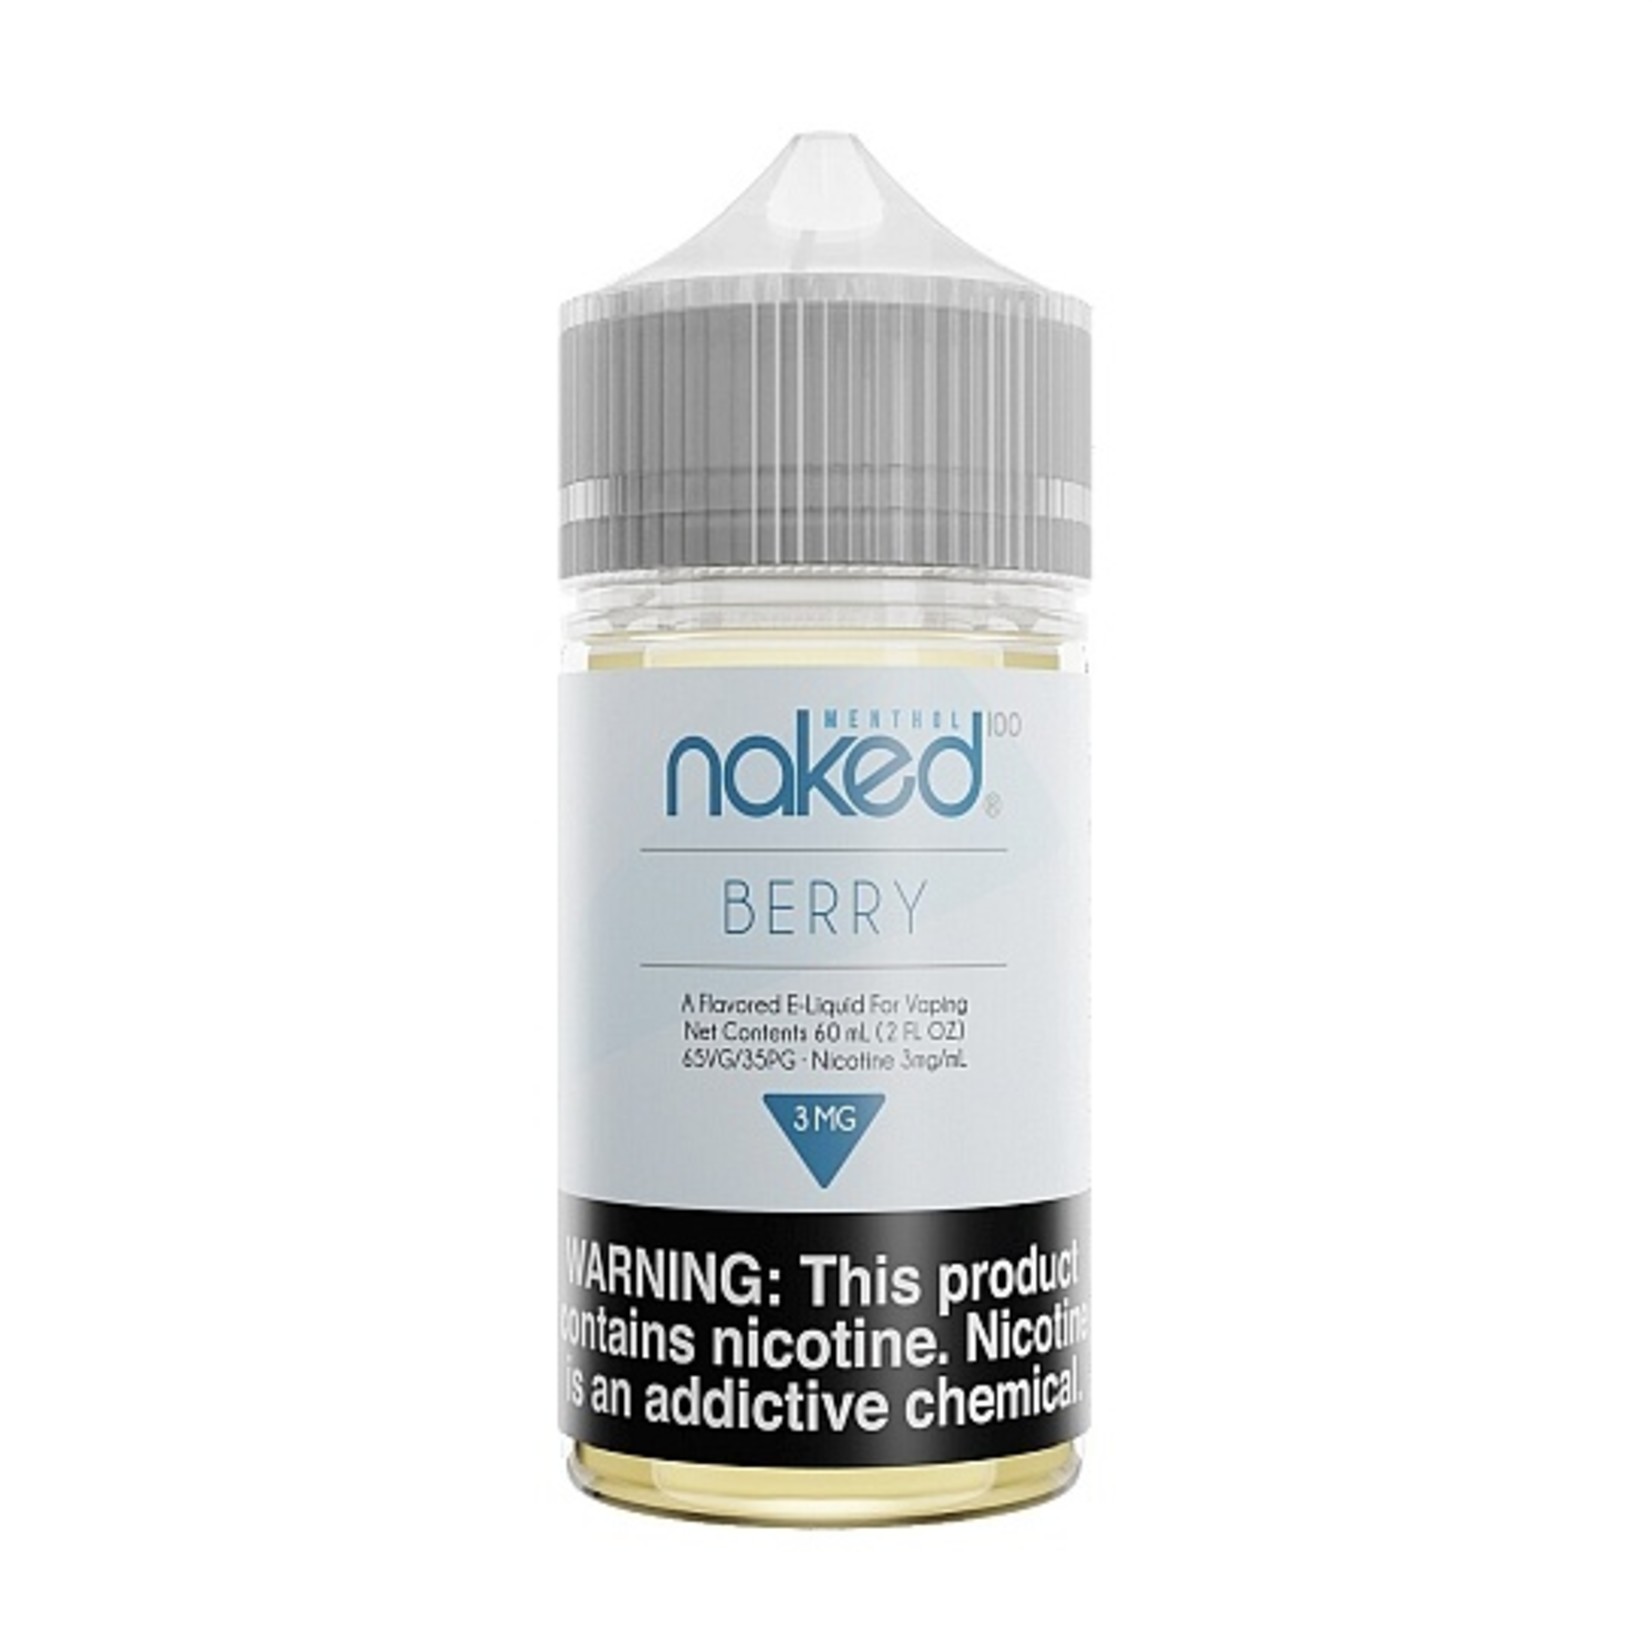 Naked 100 Berry (Very Cool) Menthol